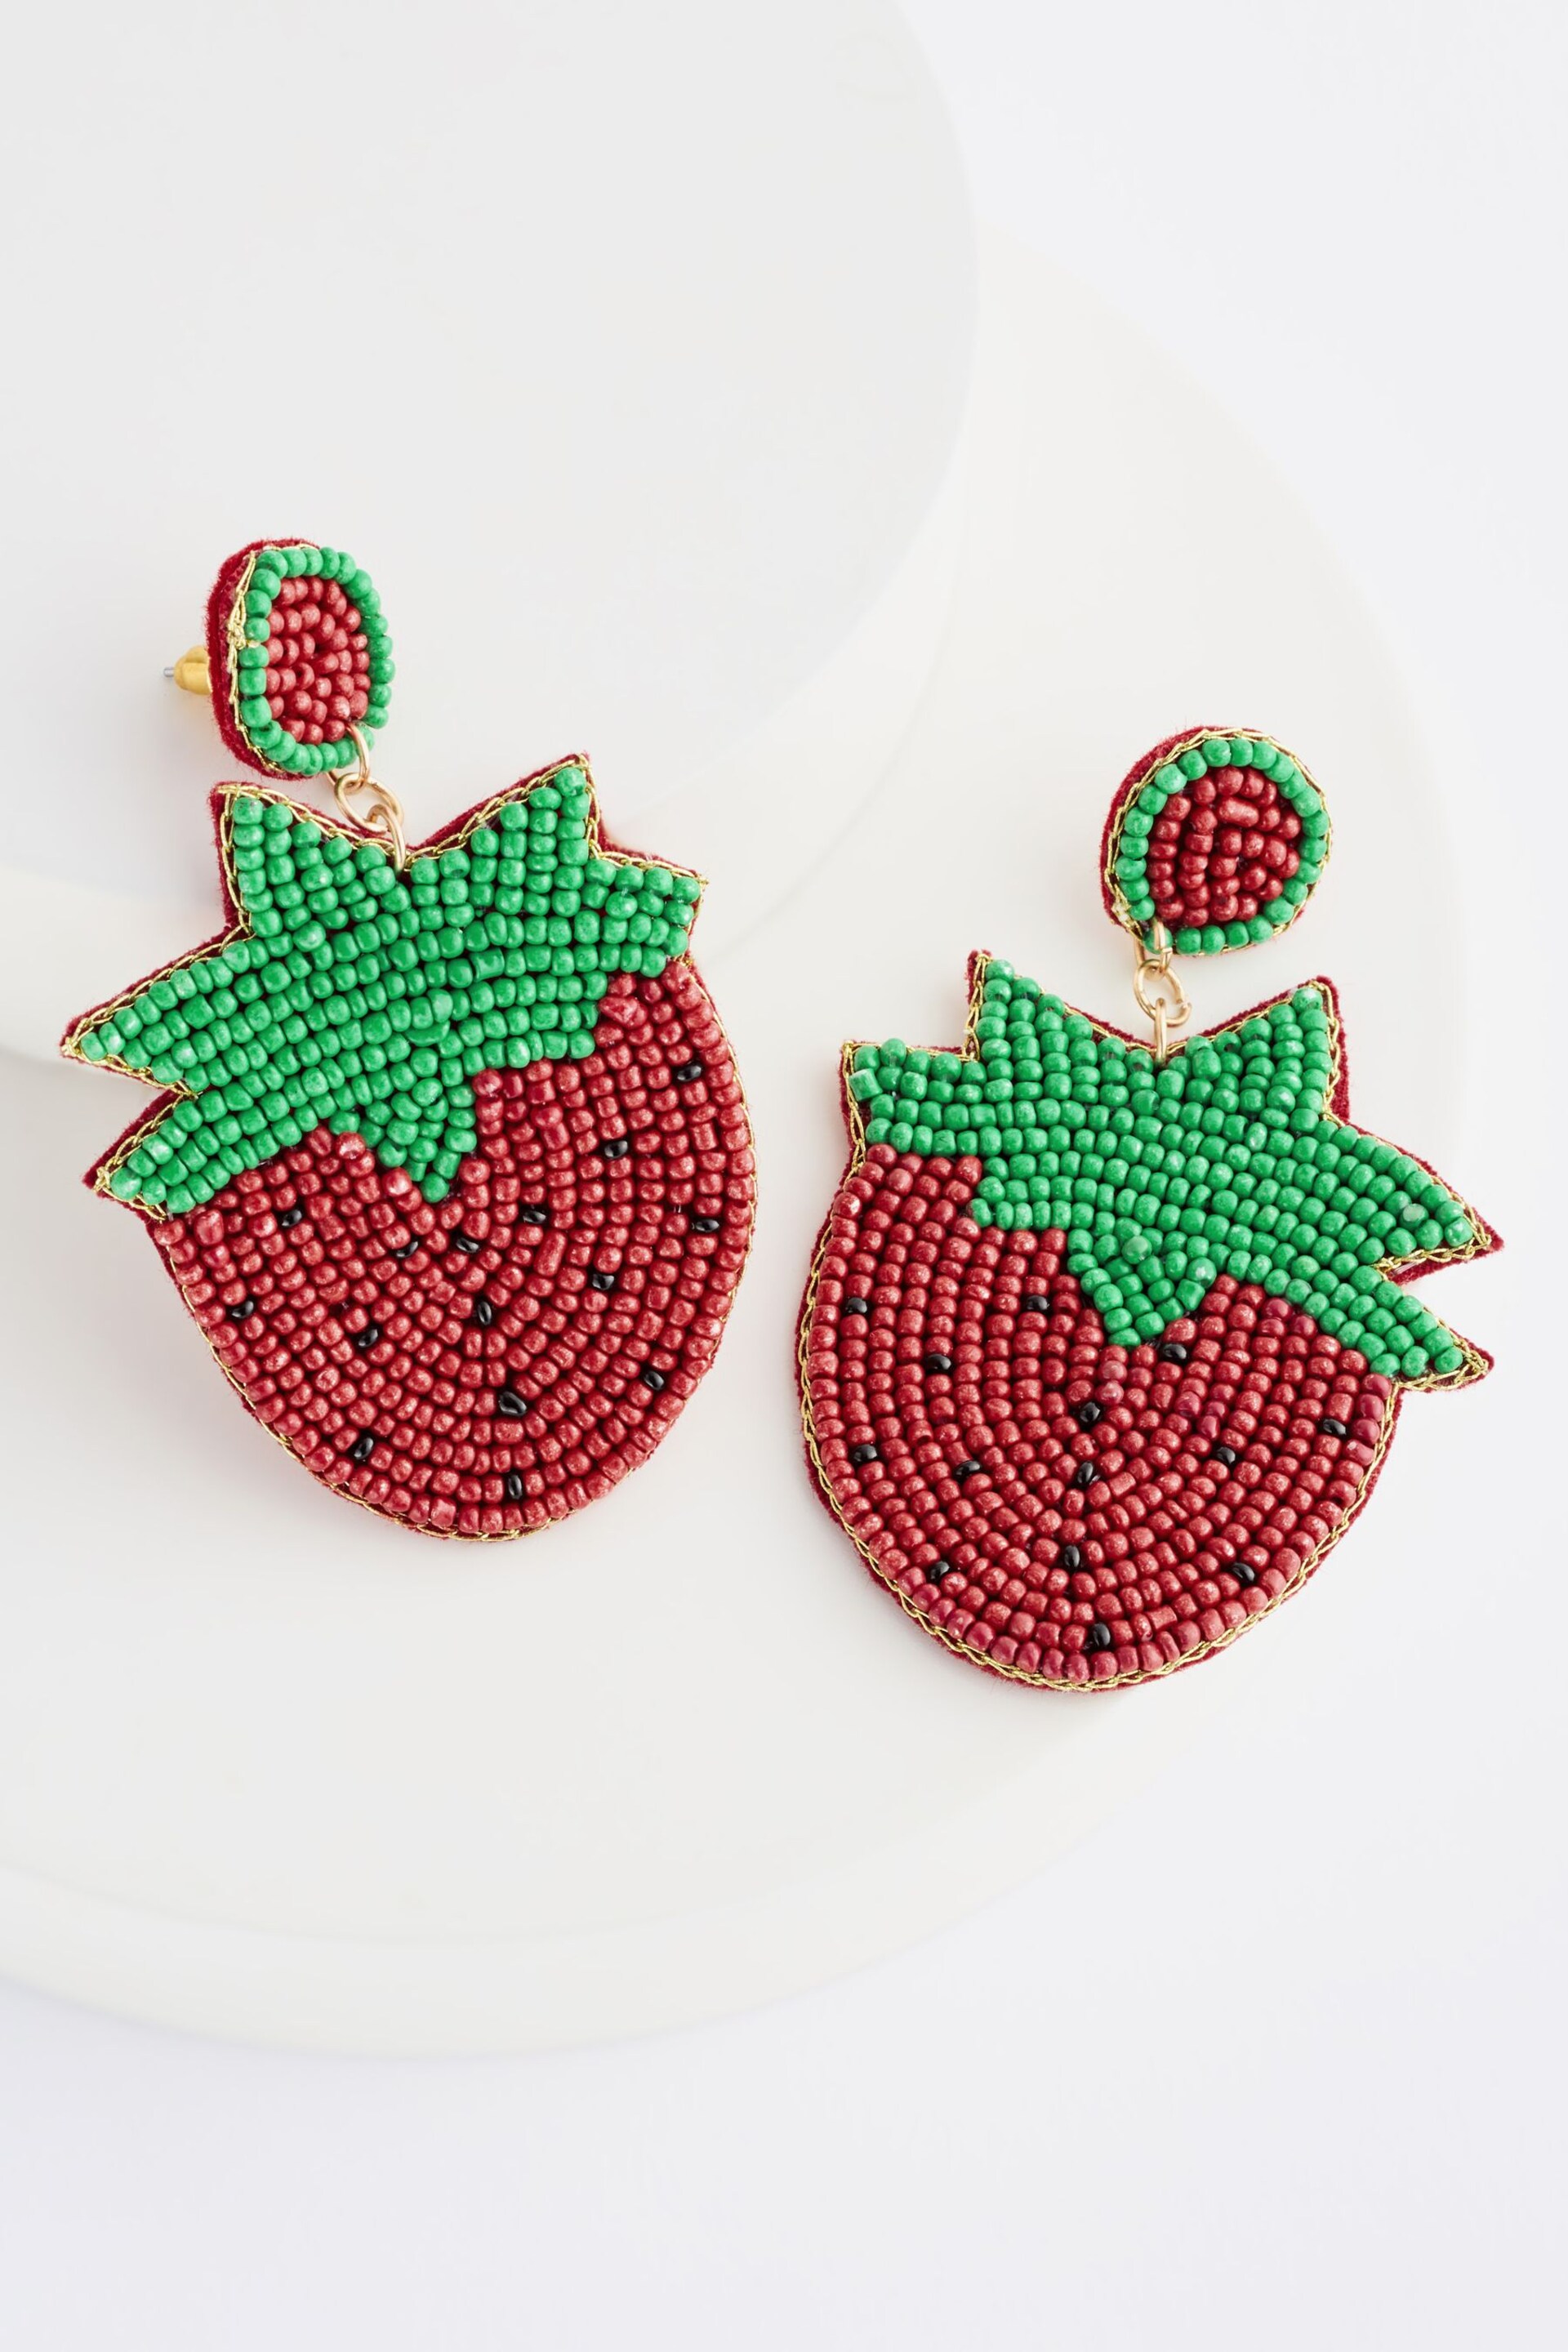 Red Strawberry Statement Beaded Earrings - Image 2 of 2